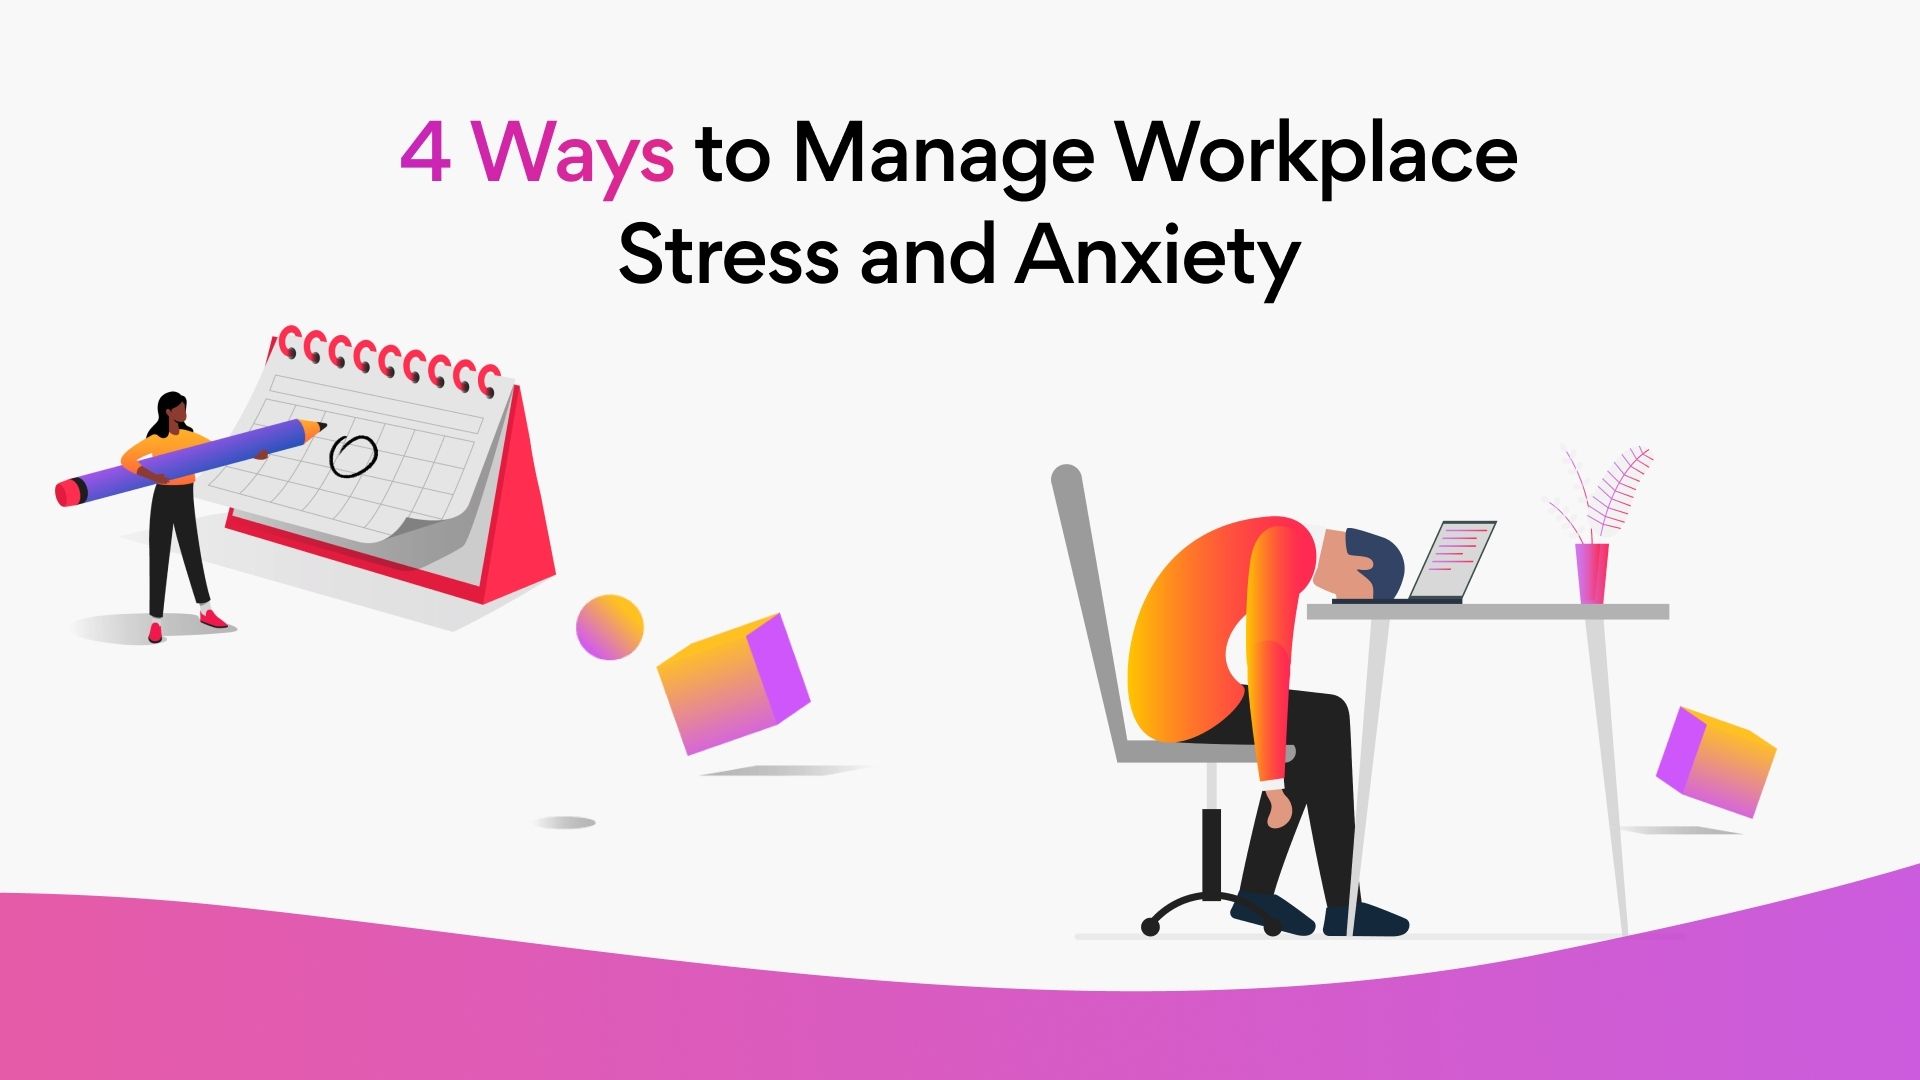 4 Ways to Manage Workplace Stress and Anxiety